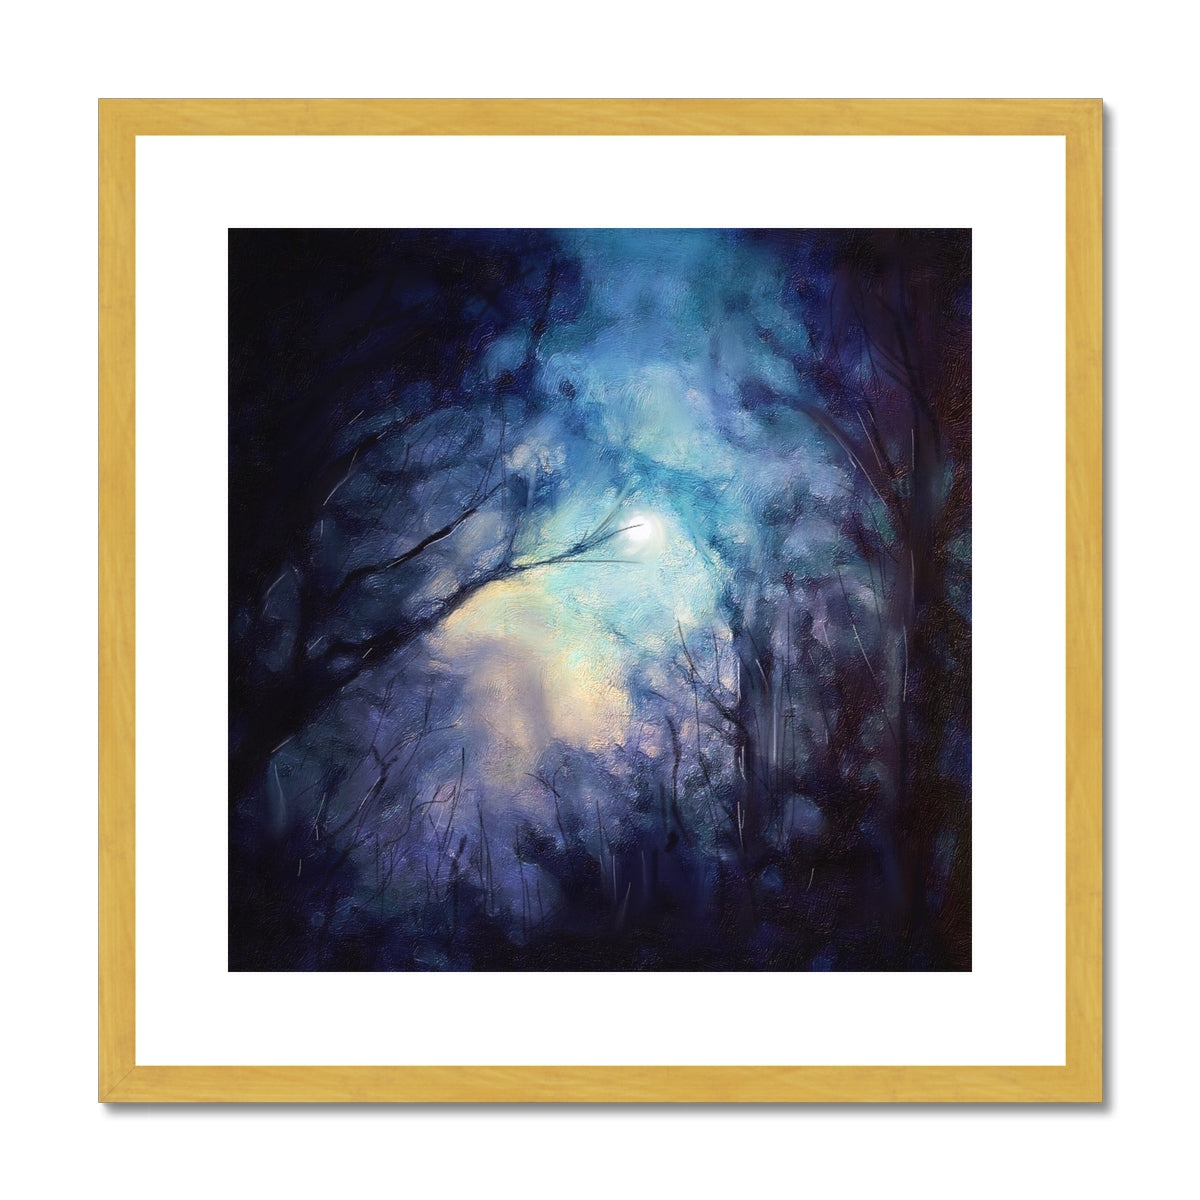 A Moonlit Highland Wood Painting | Antique Framed & Mounted Prints From Scotland-Antique Framed & Mounted Prints-Scottish Highlands & Lowlands Art Gallery-20"x20"-Gold Frame-Paintings, Prints, Homeware, Art Gifts From Scotland By Scottish Artist Kevin Hunter